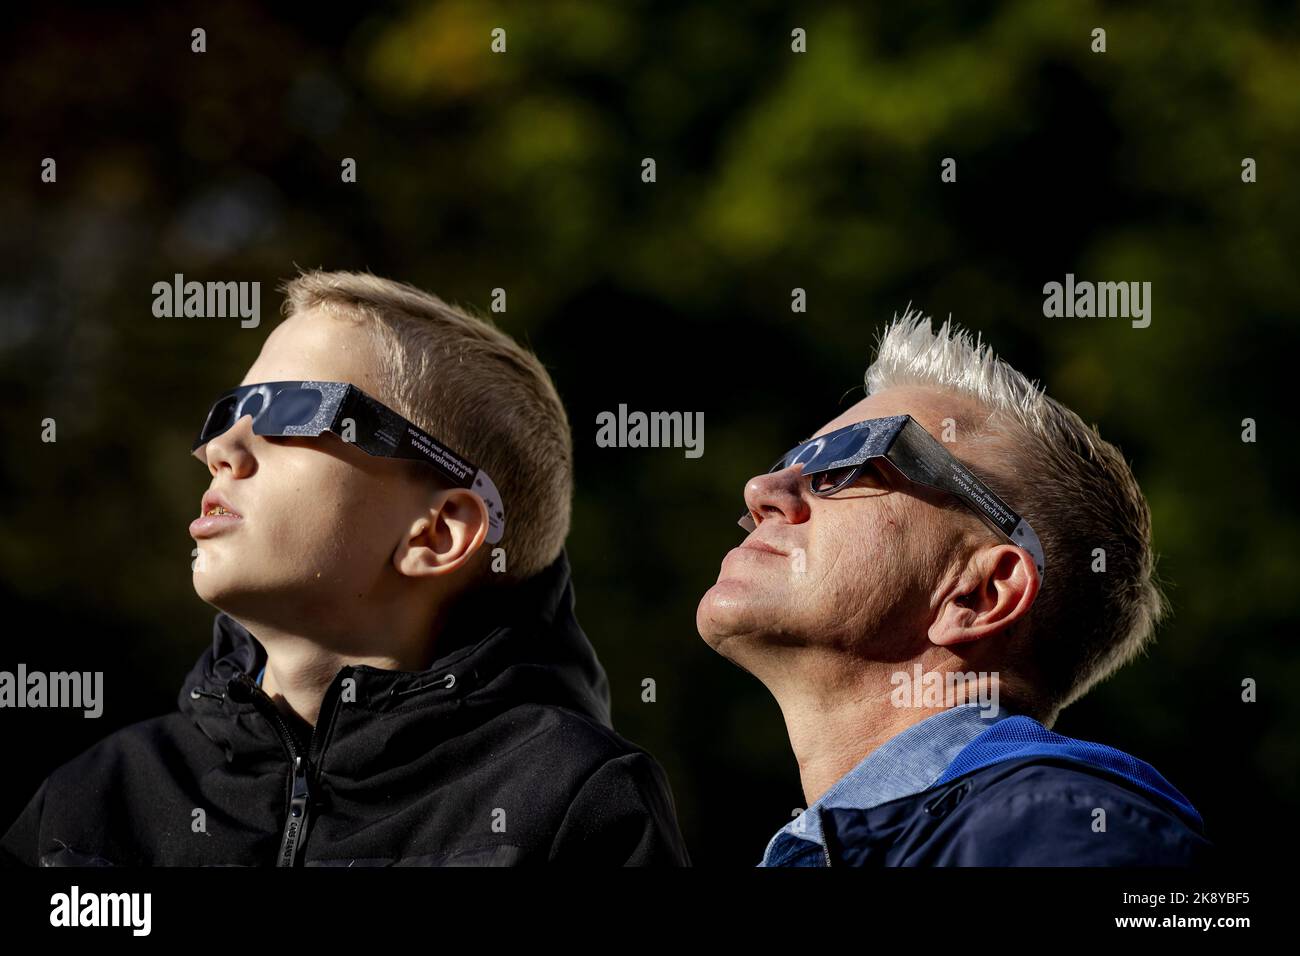 2022-10-25 11:51:51 UTRECHT - Visitors to the Sonnenborgh museum view a partial solar eclipse with eclipse glasses. The sun is partly hidden behind the moon, making it seem as if a bite is taken from the sun. ANP ROBIN VAN LONKHUIJSEN netherlands out - belgium out Stock Photo